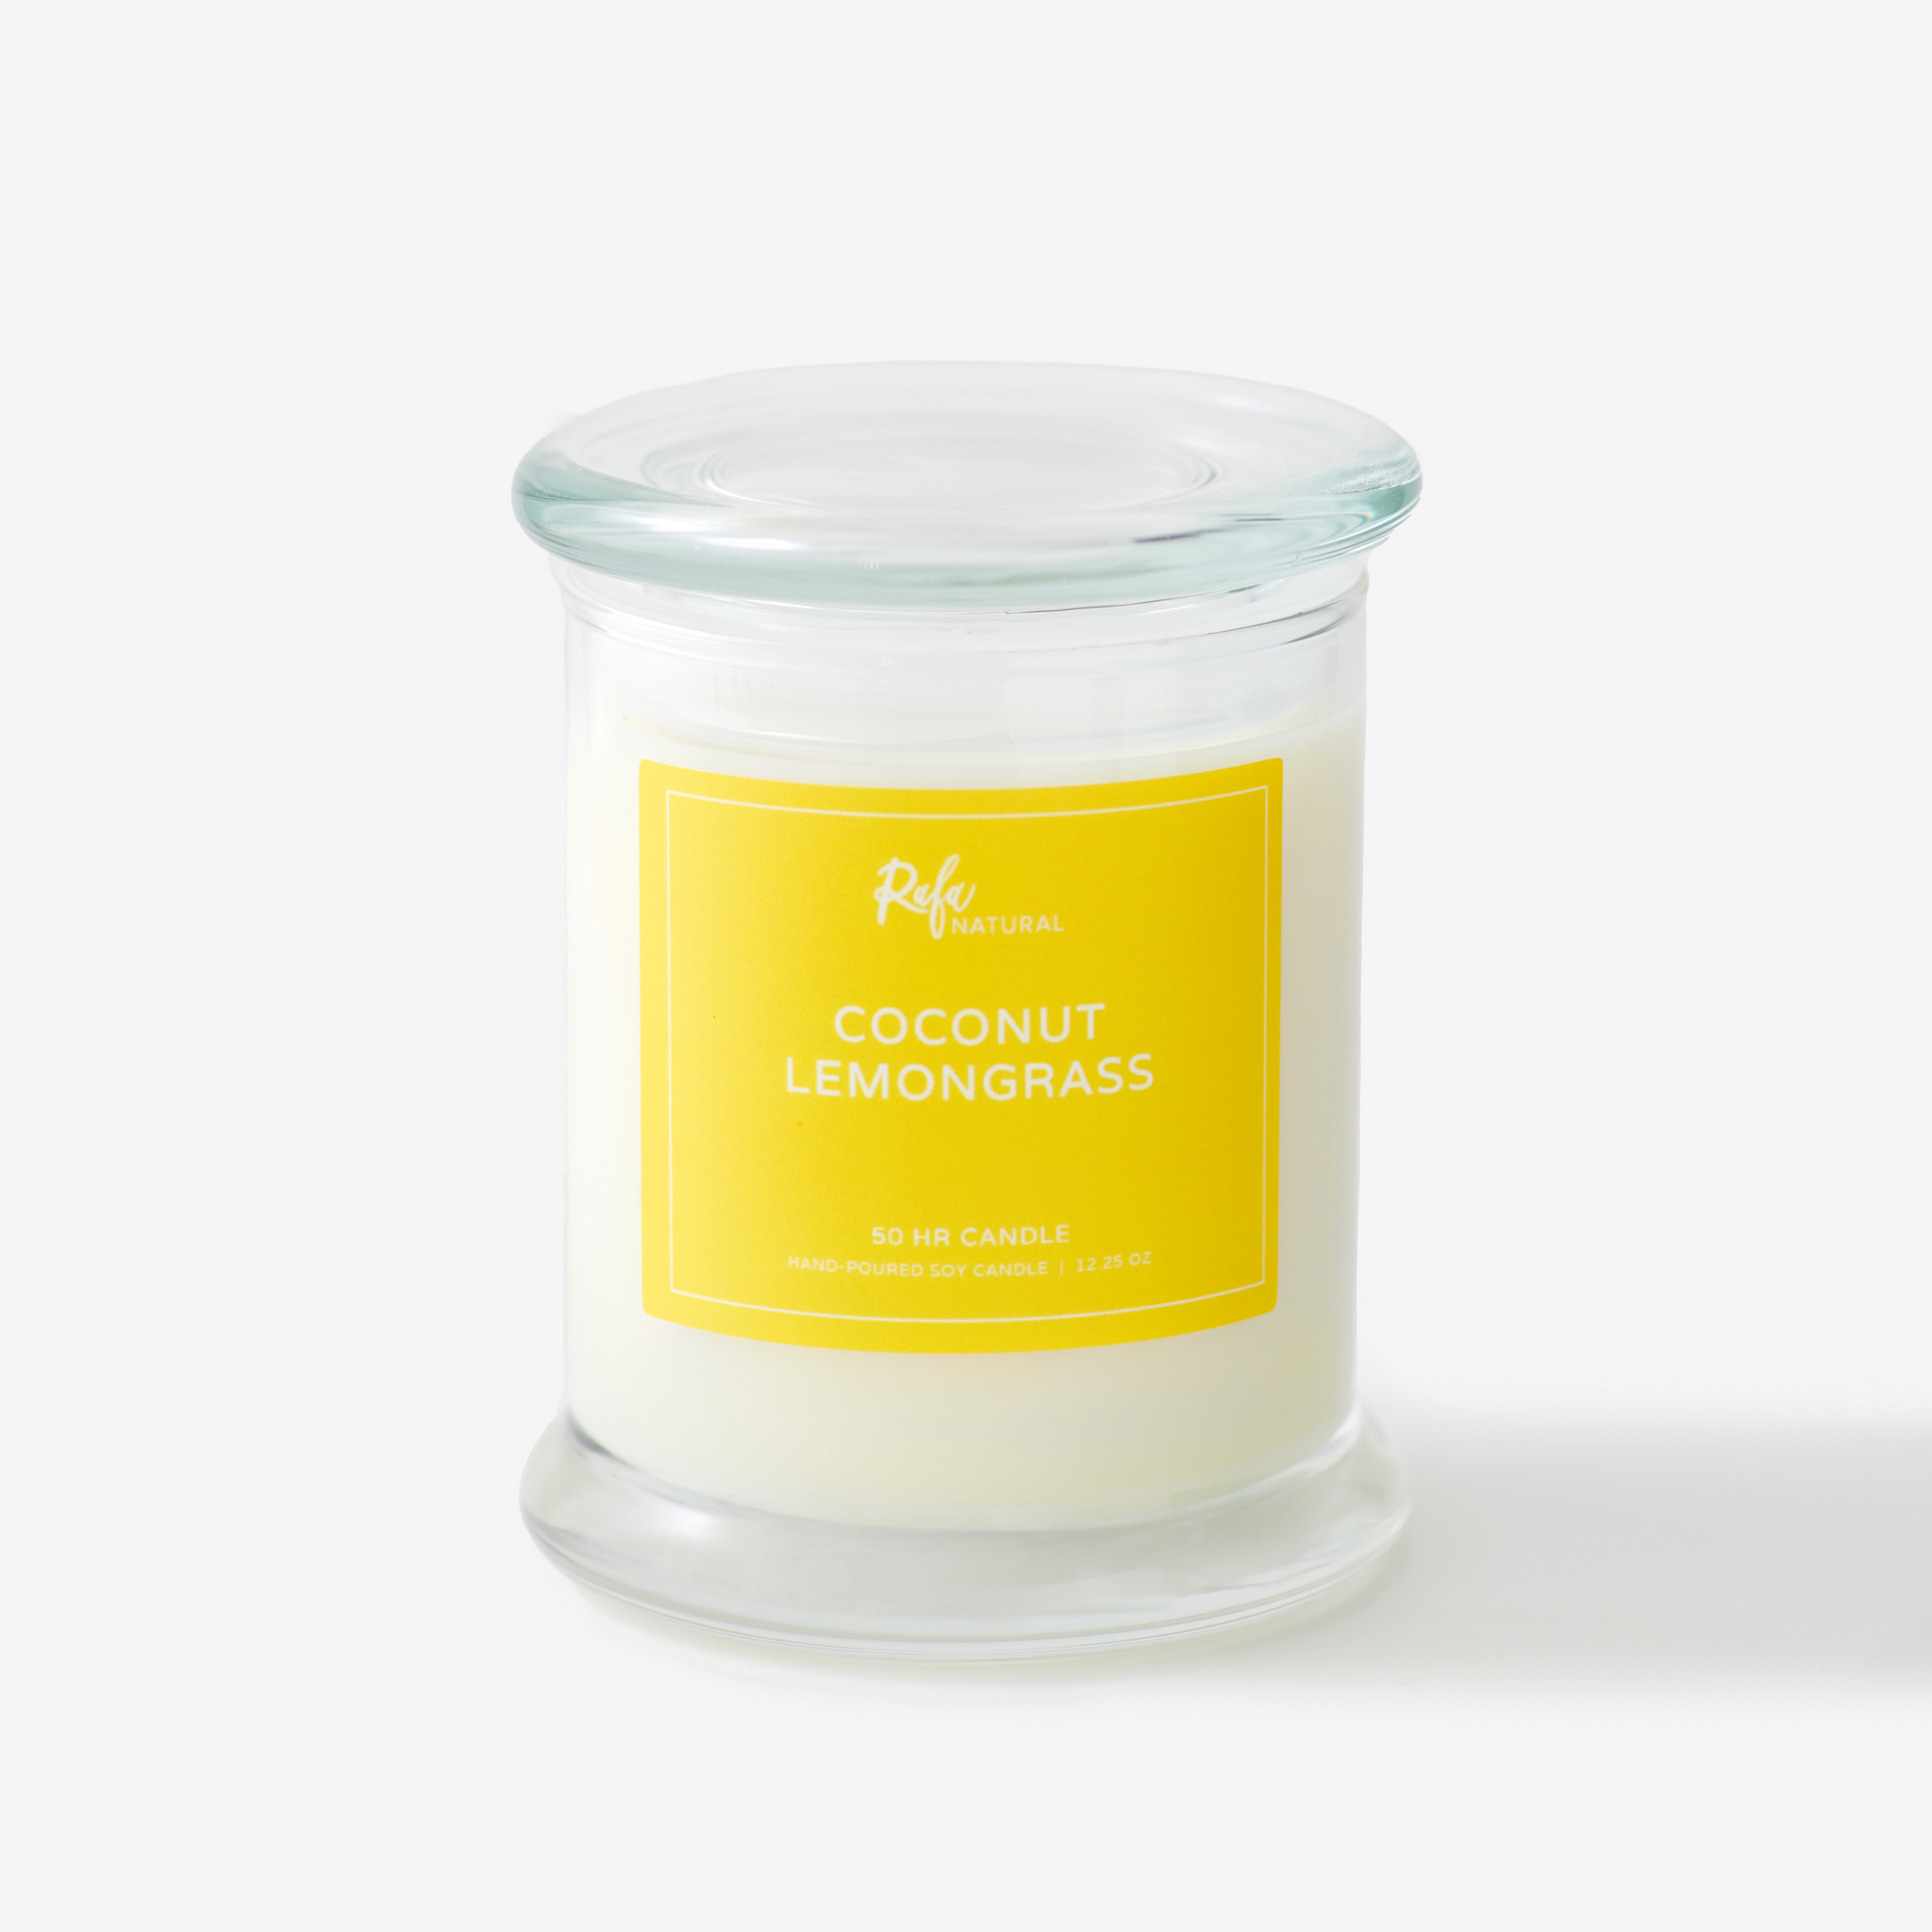 Coconut Lemongrass 50Hr Soy Candle by Rafa Natural